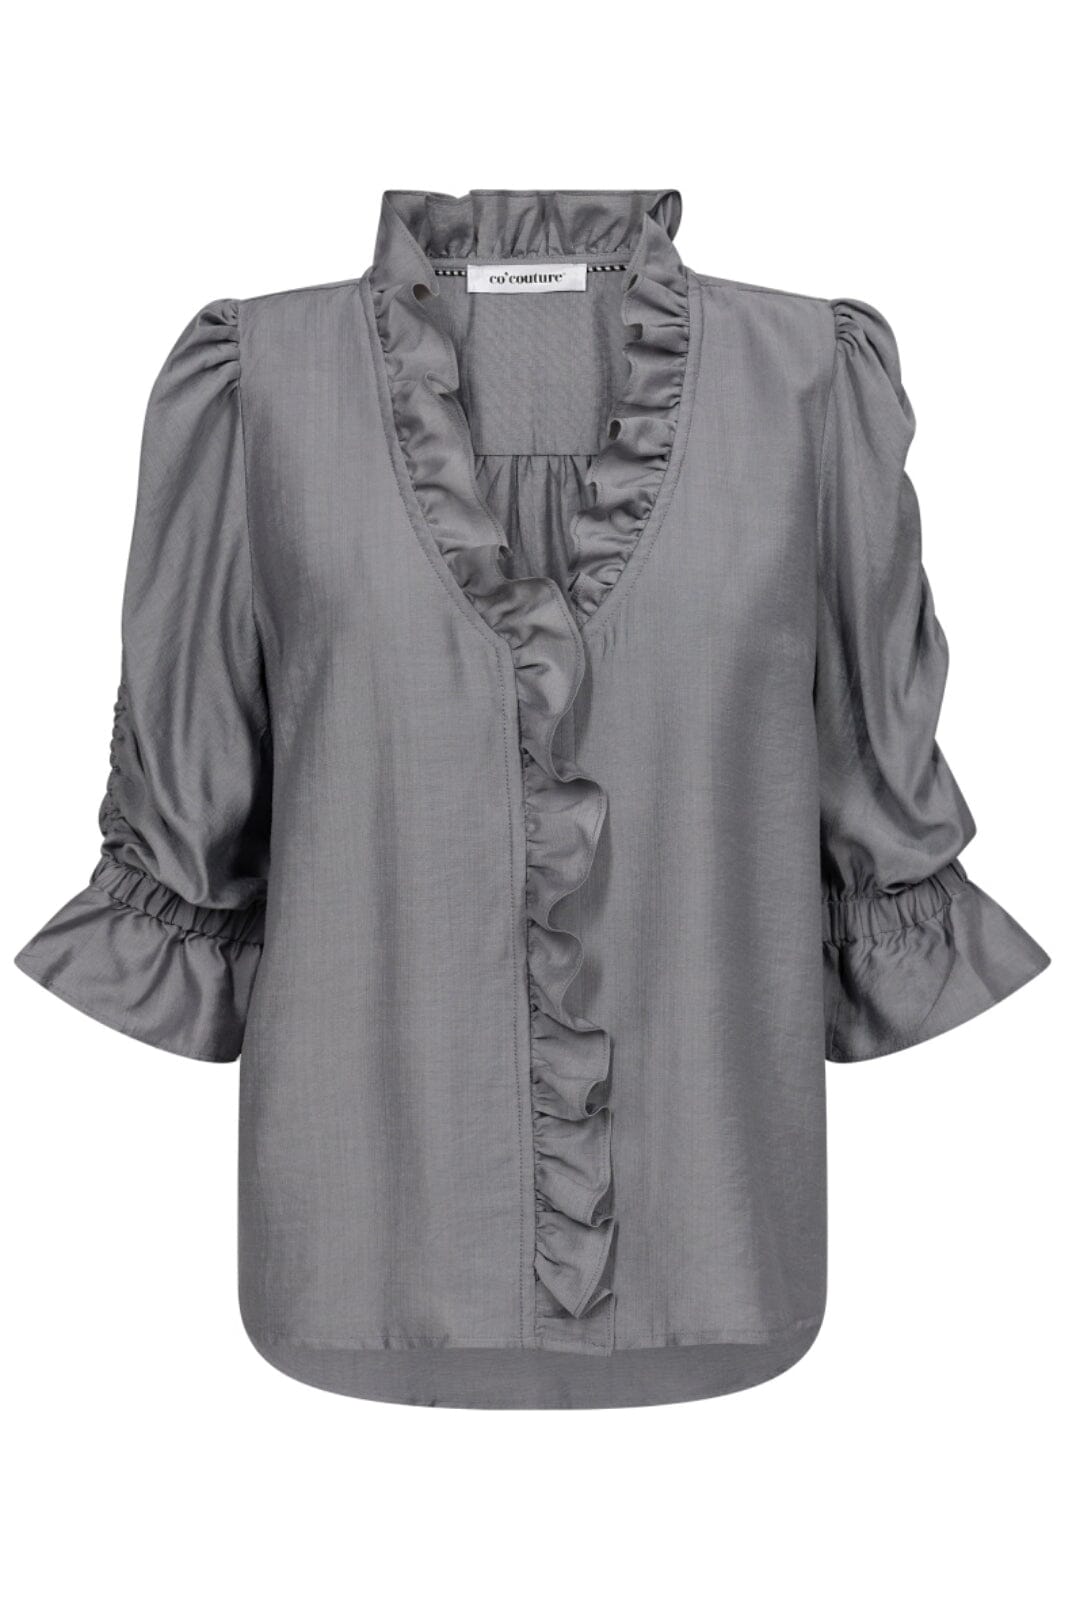 Co´couture - Heracc Frill Ss Blouse 35535 - 138 Light Grey Skjorter 